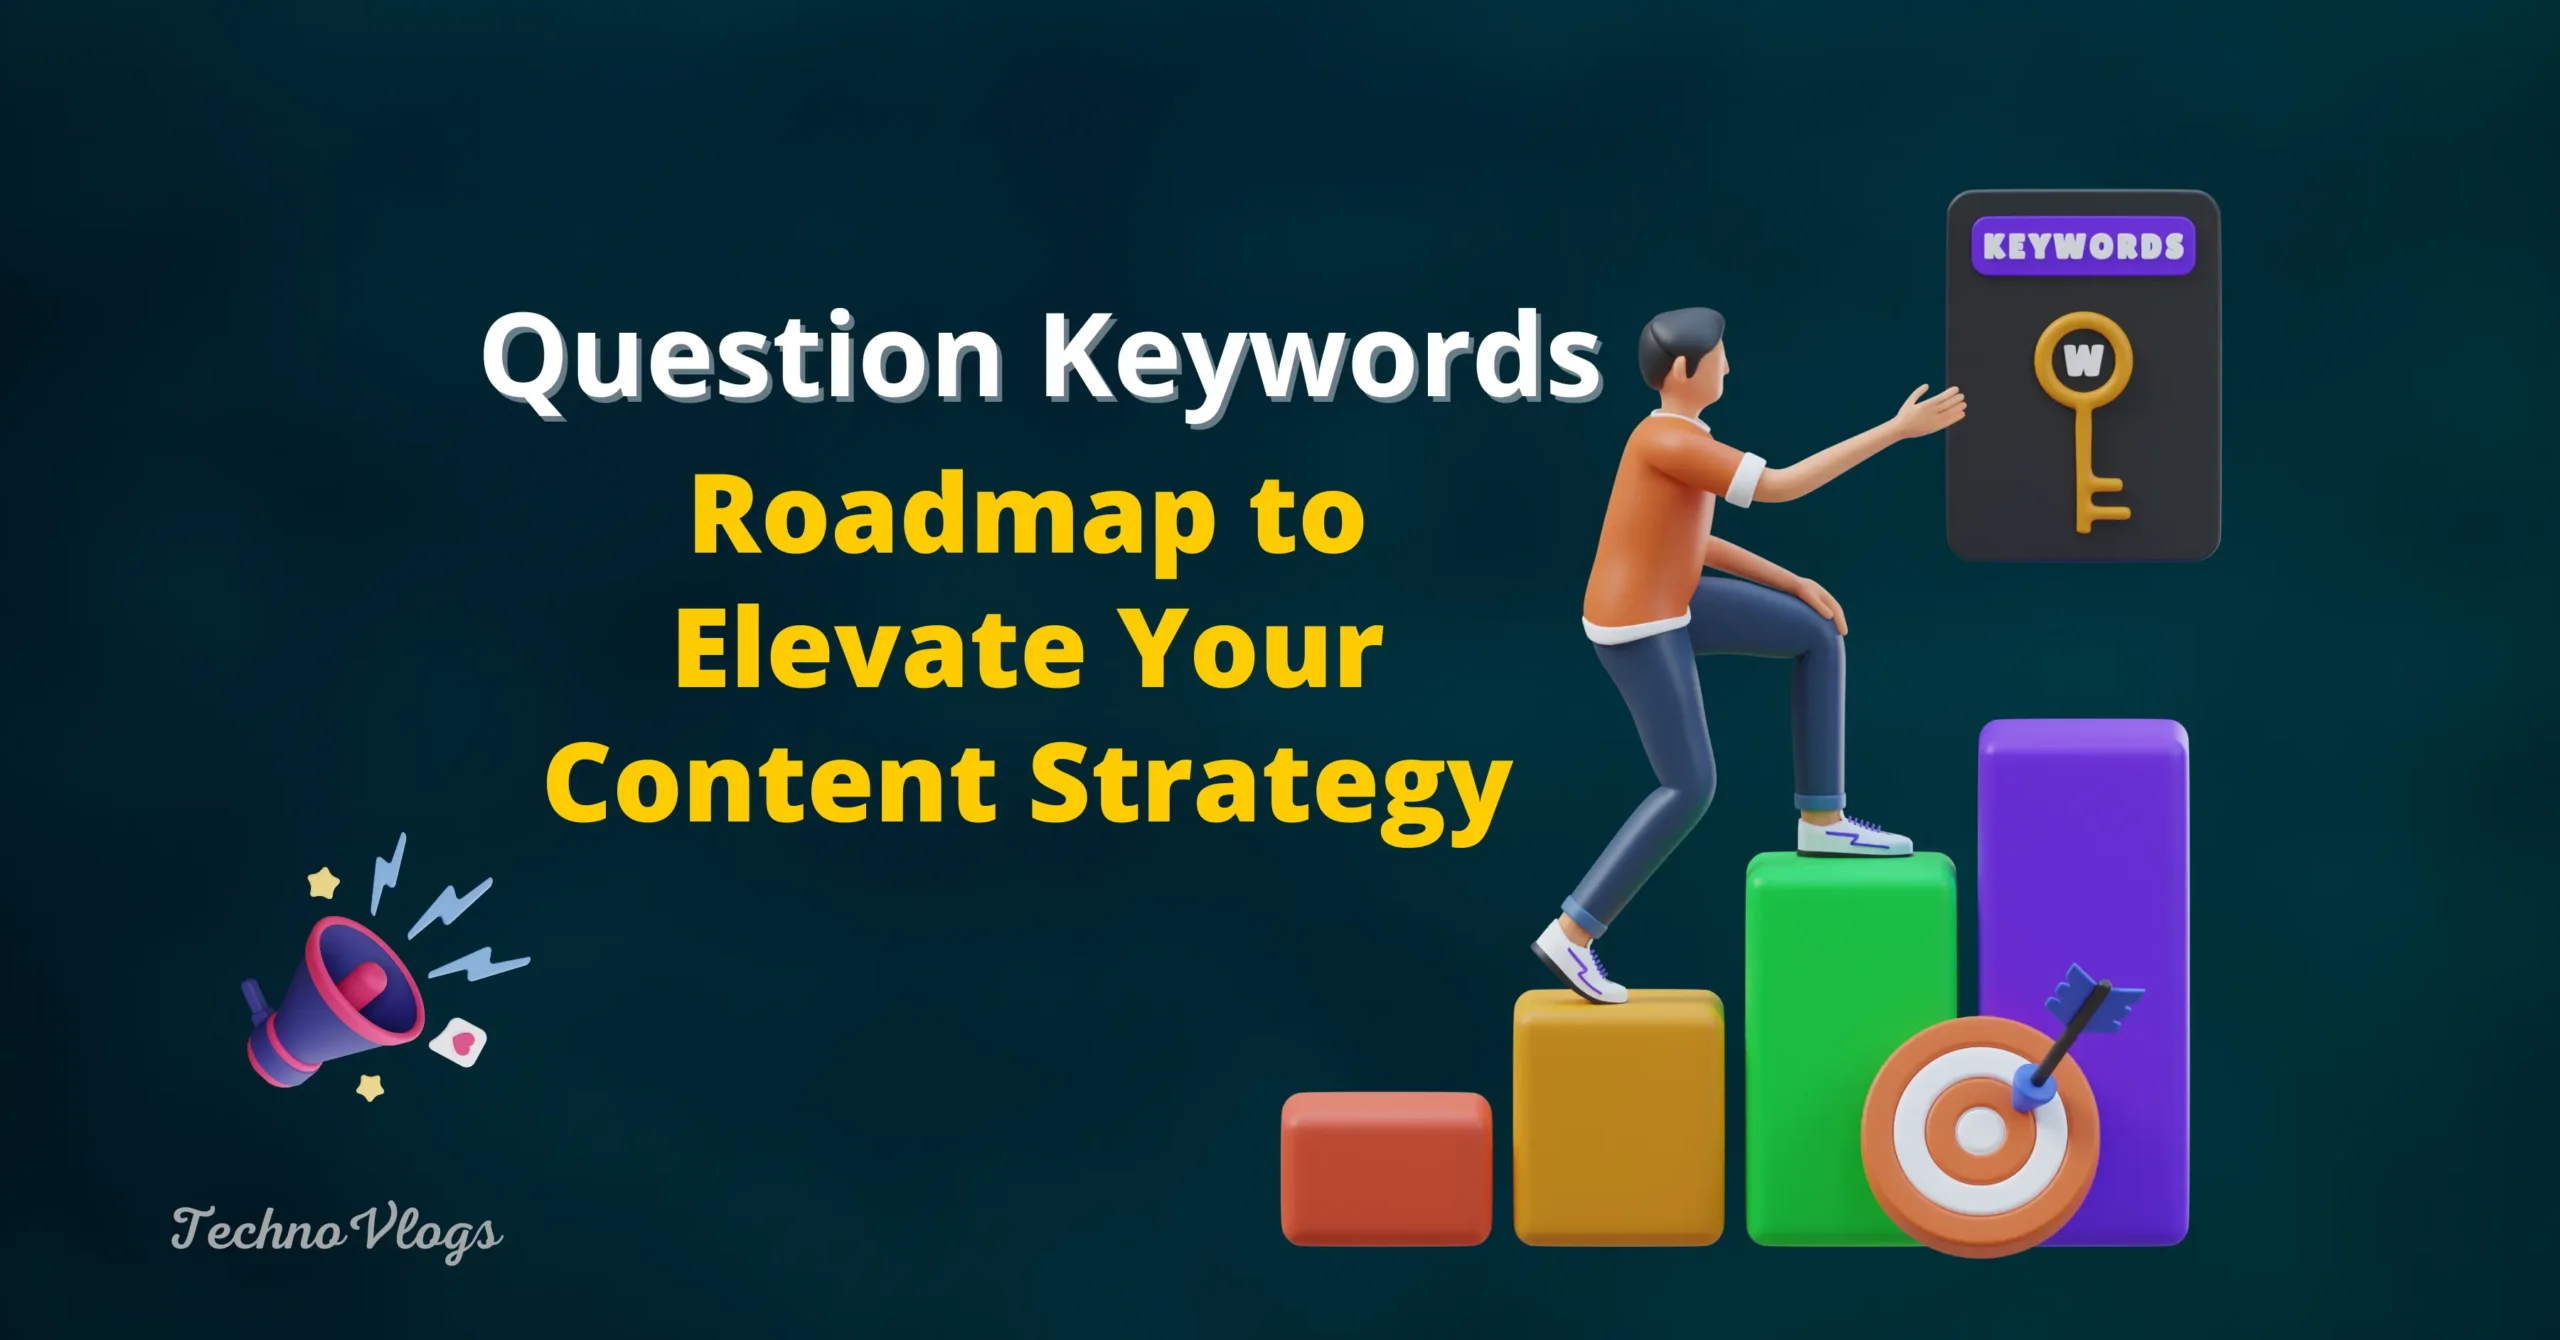 Question Keywords: Roadmap to Elevate Your Content Strategy